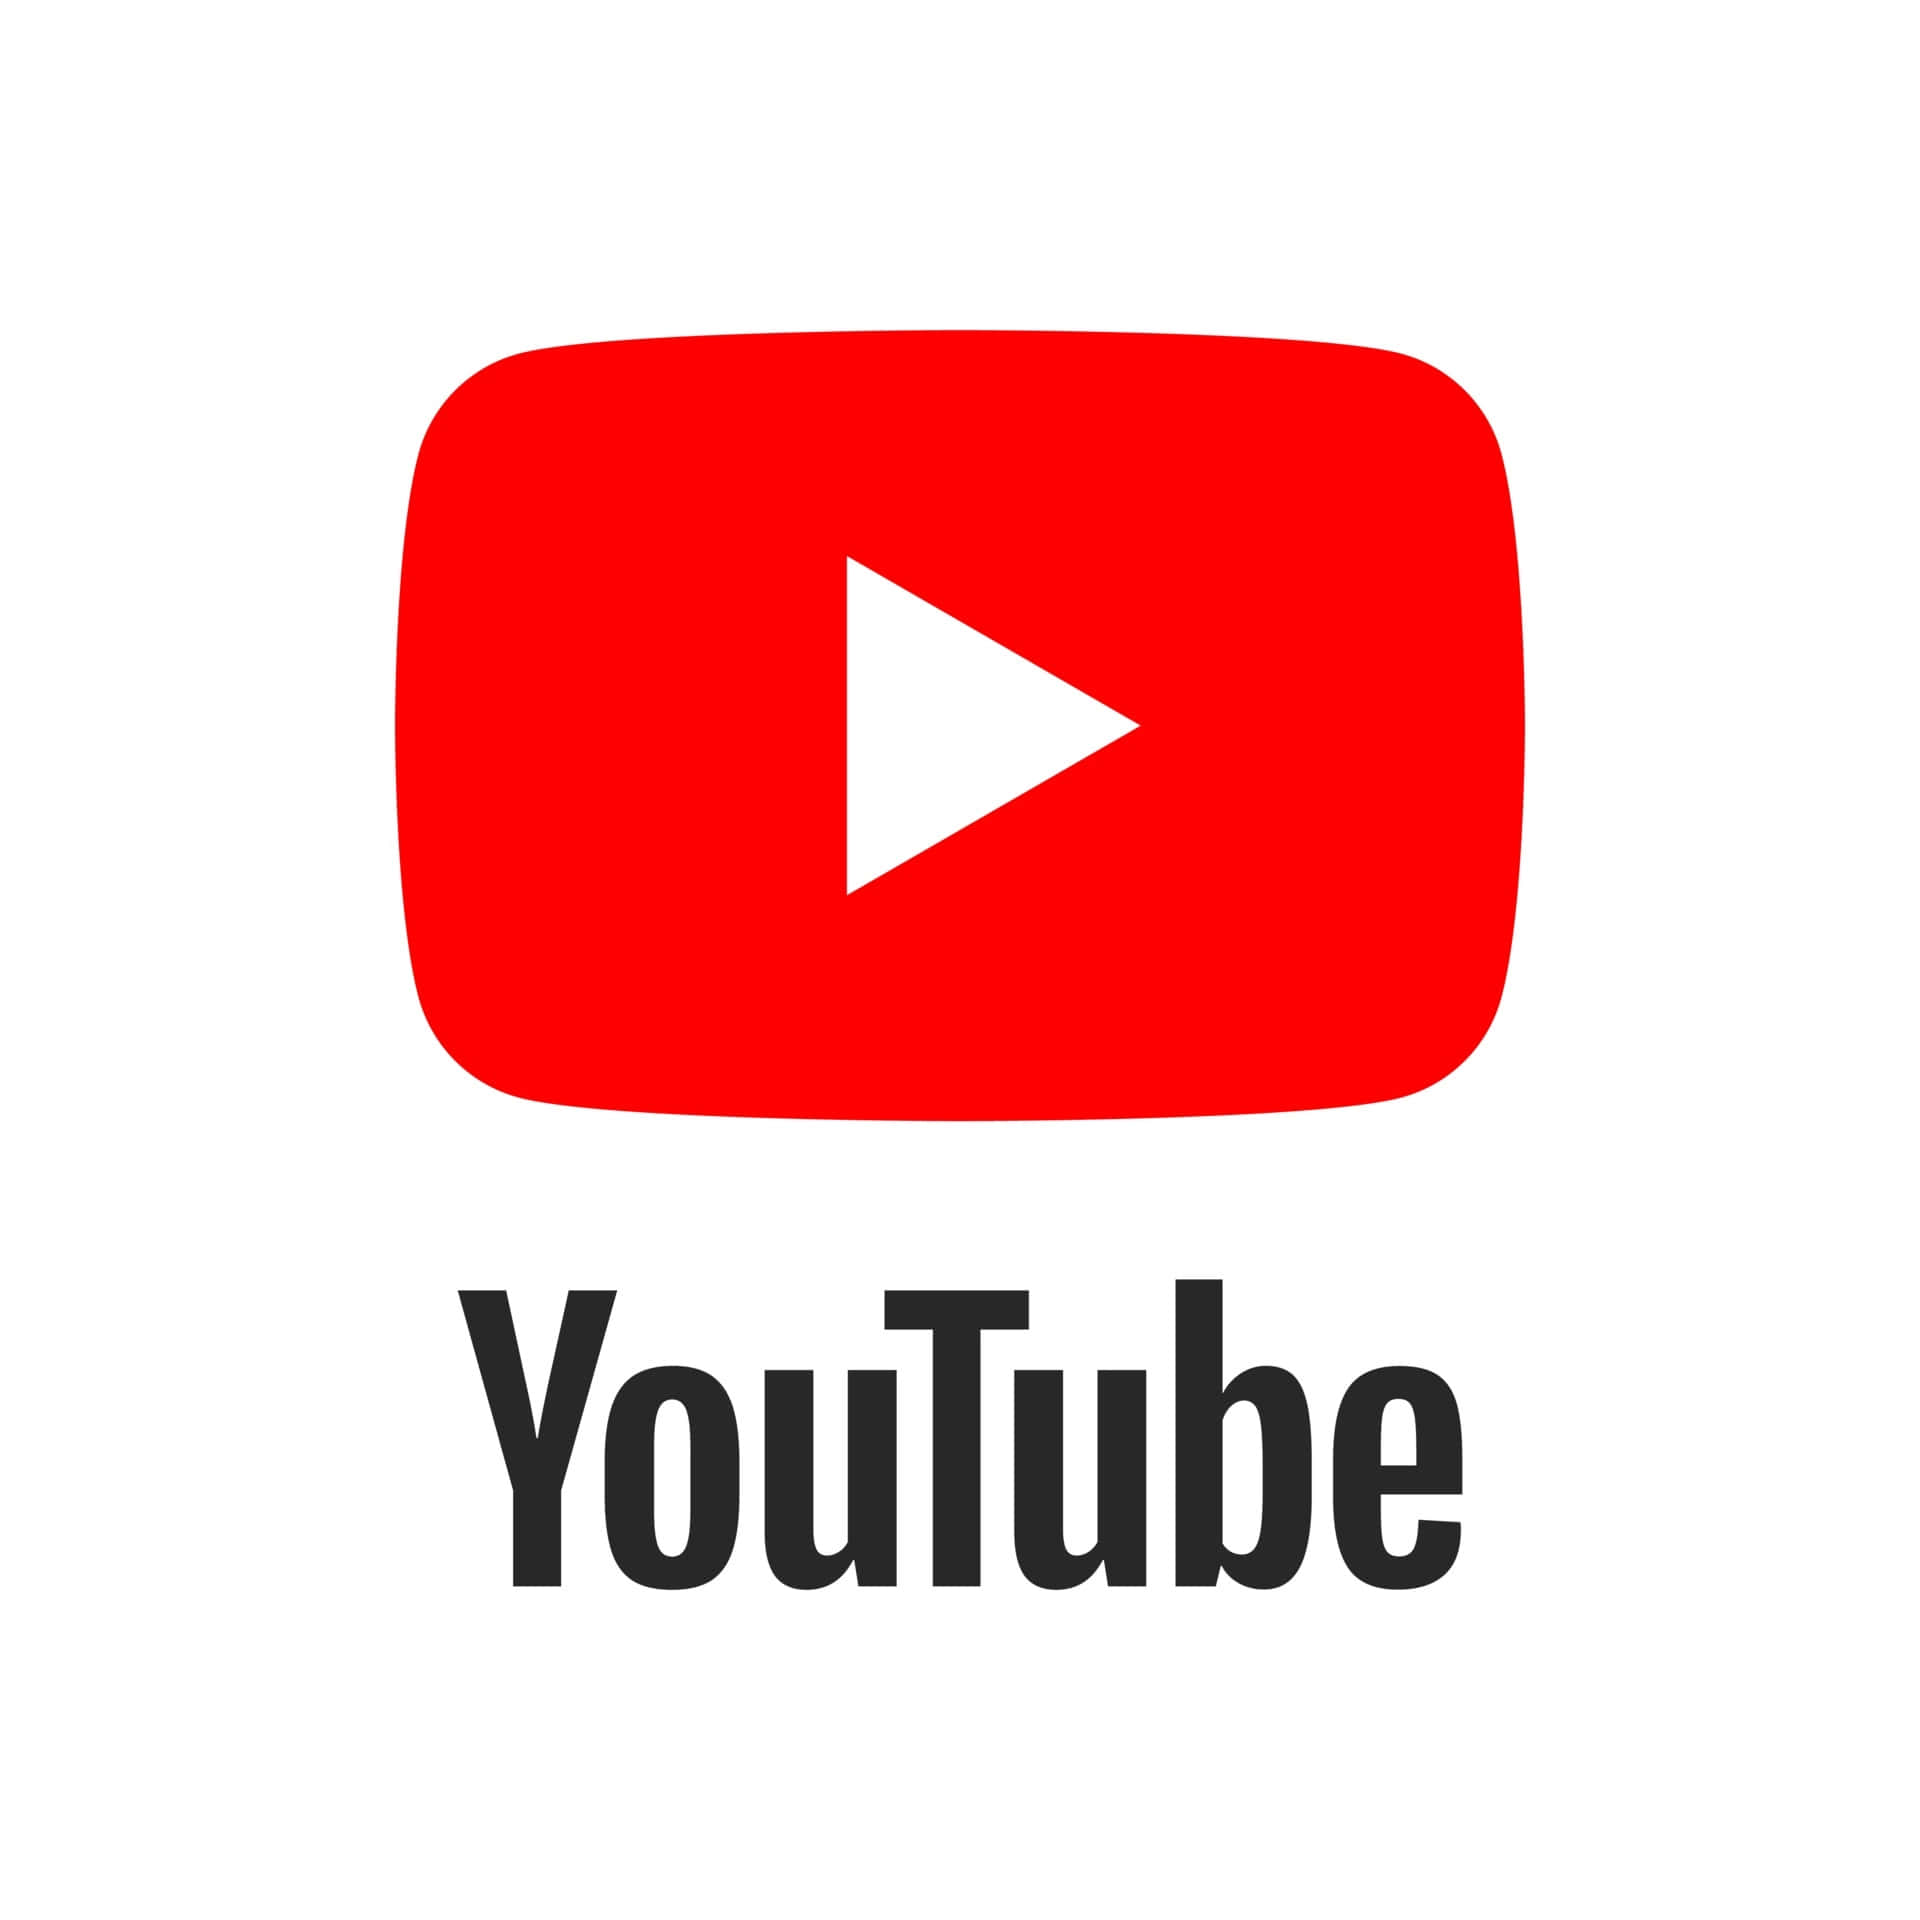 Youtube Logo With A Red Arrow